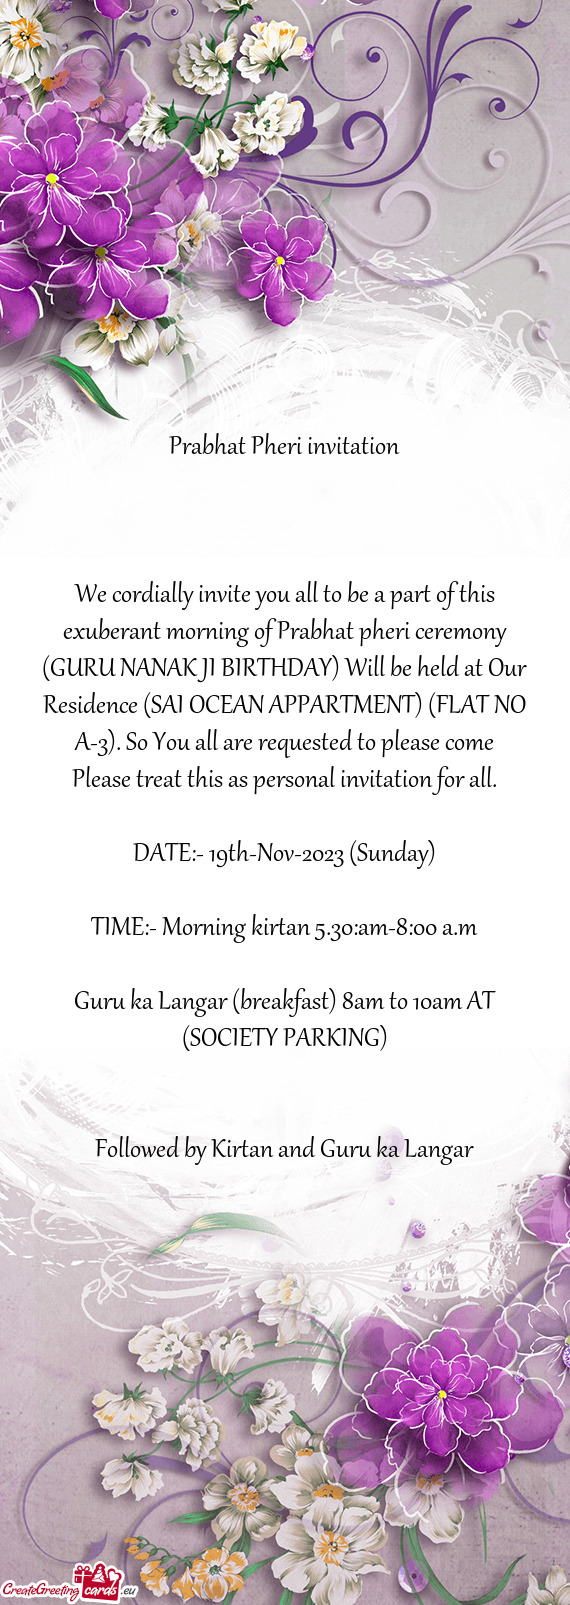 ANAK JI BIRTHDAY) Will be held at Our Residence (SAI OCEAN APPARTMENT) (FLAT NO A-3). So You all are